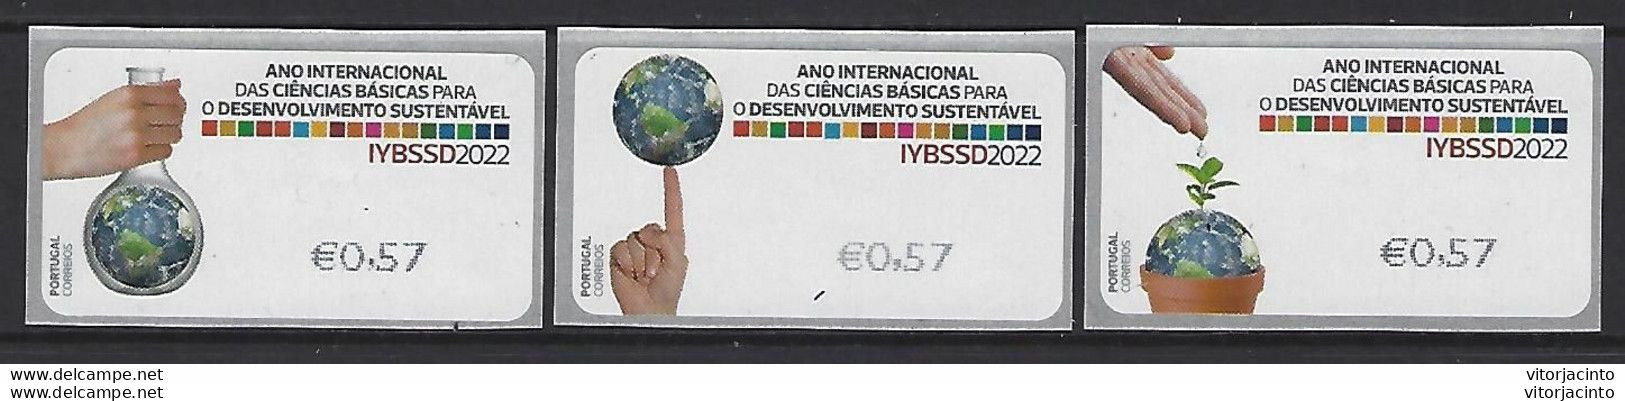 PORTUGAL - IYBSSD2022 - International Year Of Basic Sciences For Sustainable Development - Labels - Timbres De Distributeurs [ATM]